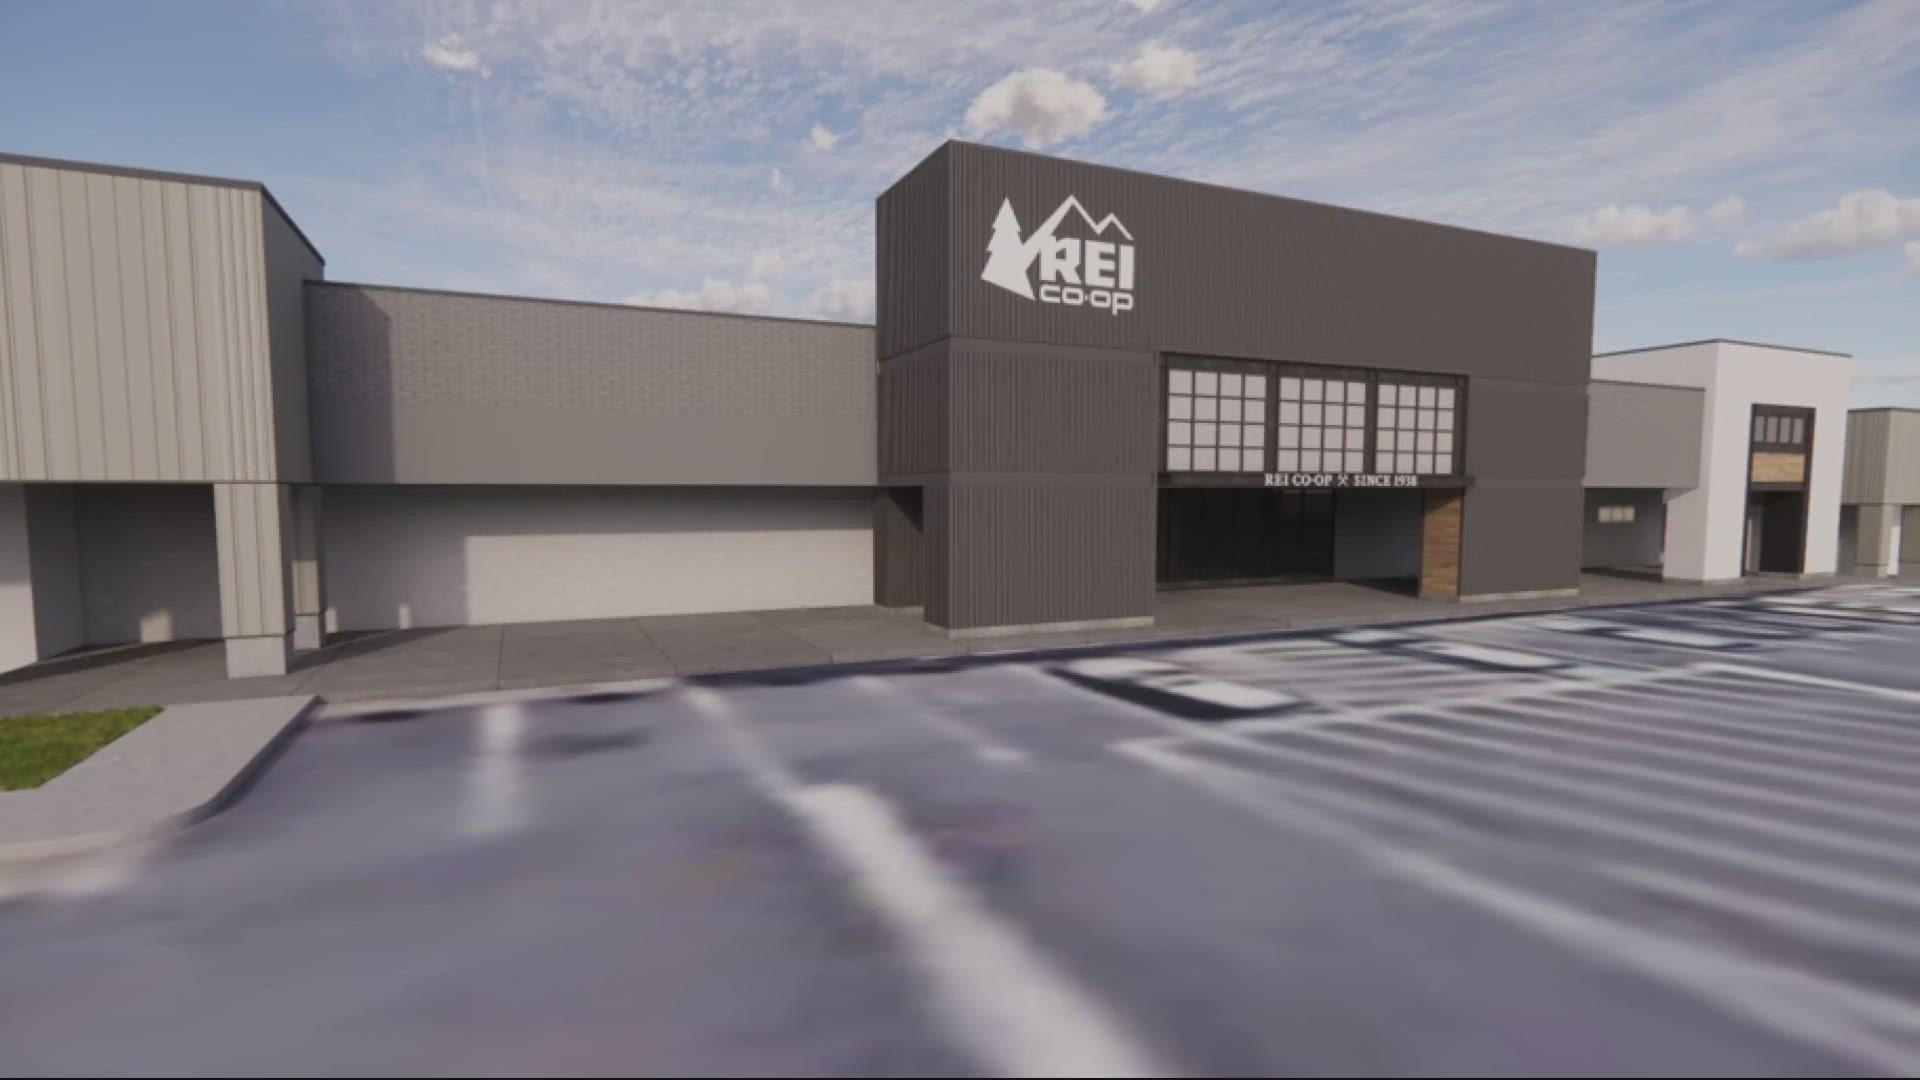 The Beaverton store will be nearly 40,000 square feet, making it the largest REI store in Oregon.